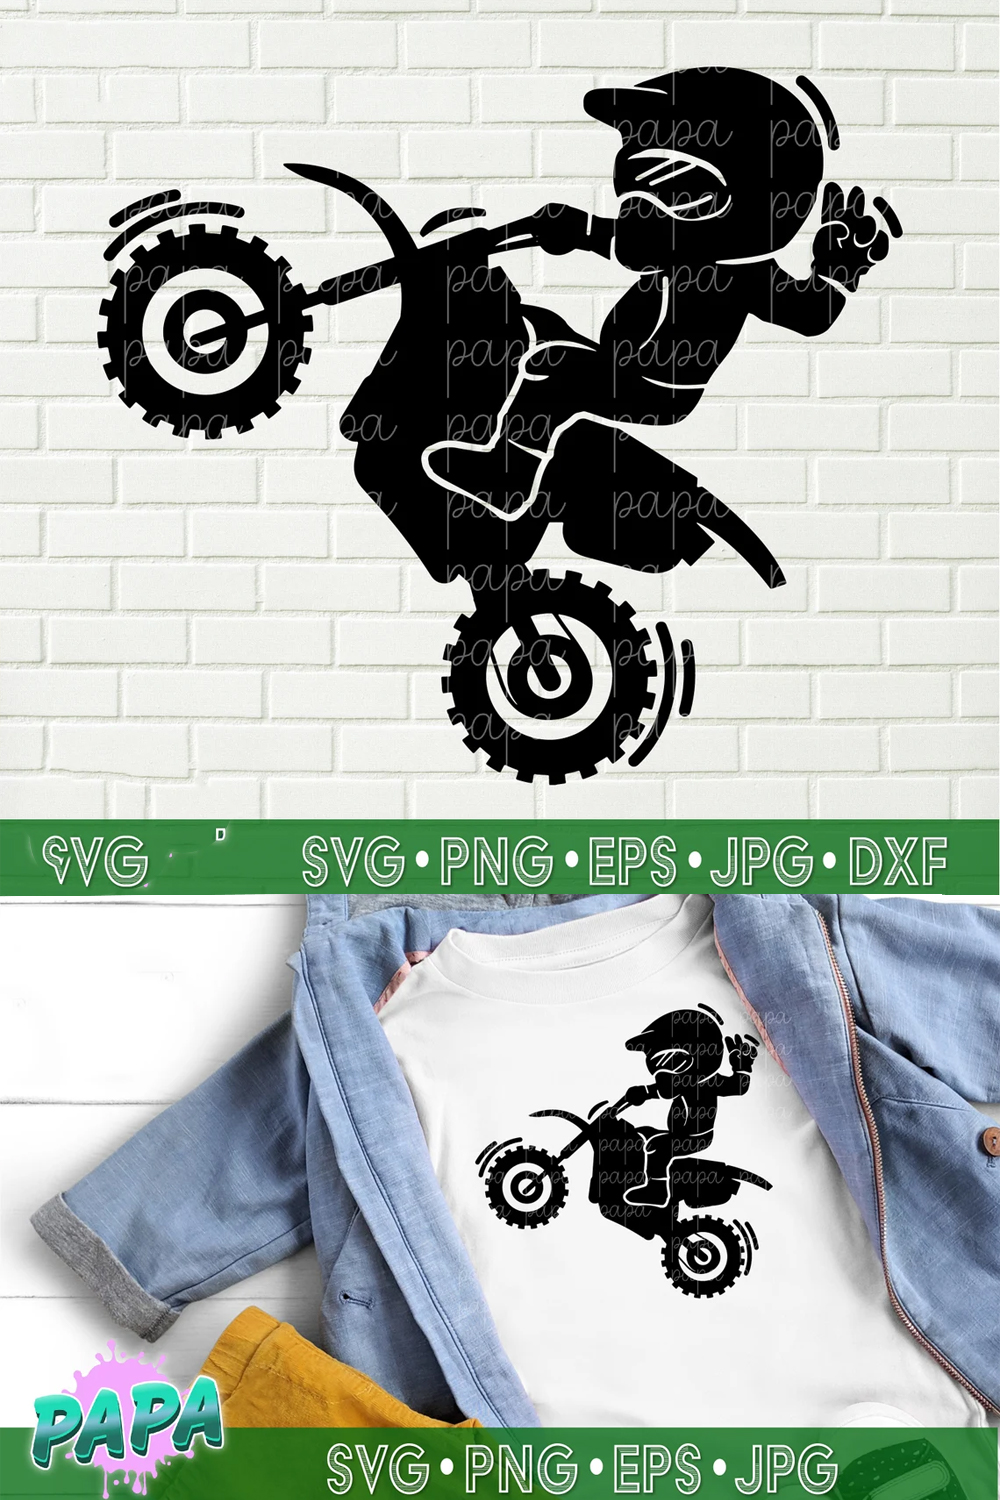 Awesome kid motorcyclist black print on clothes.